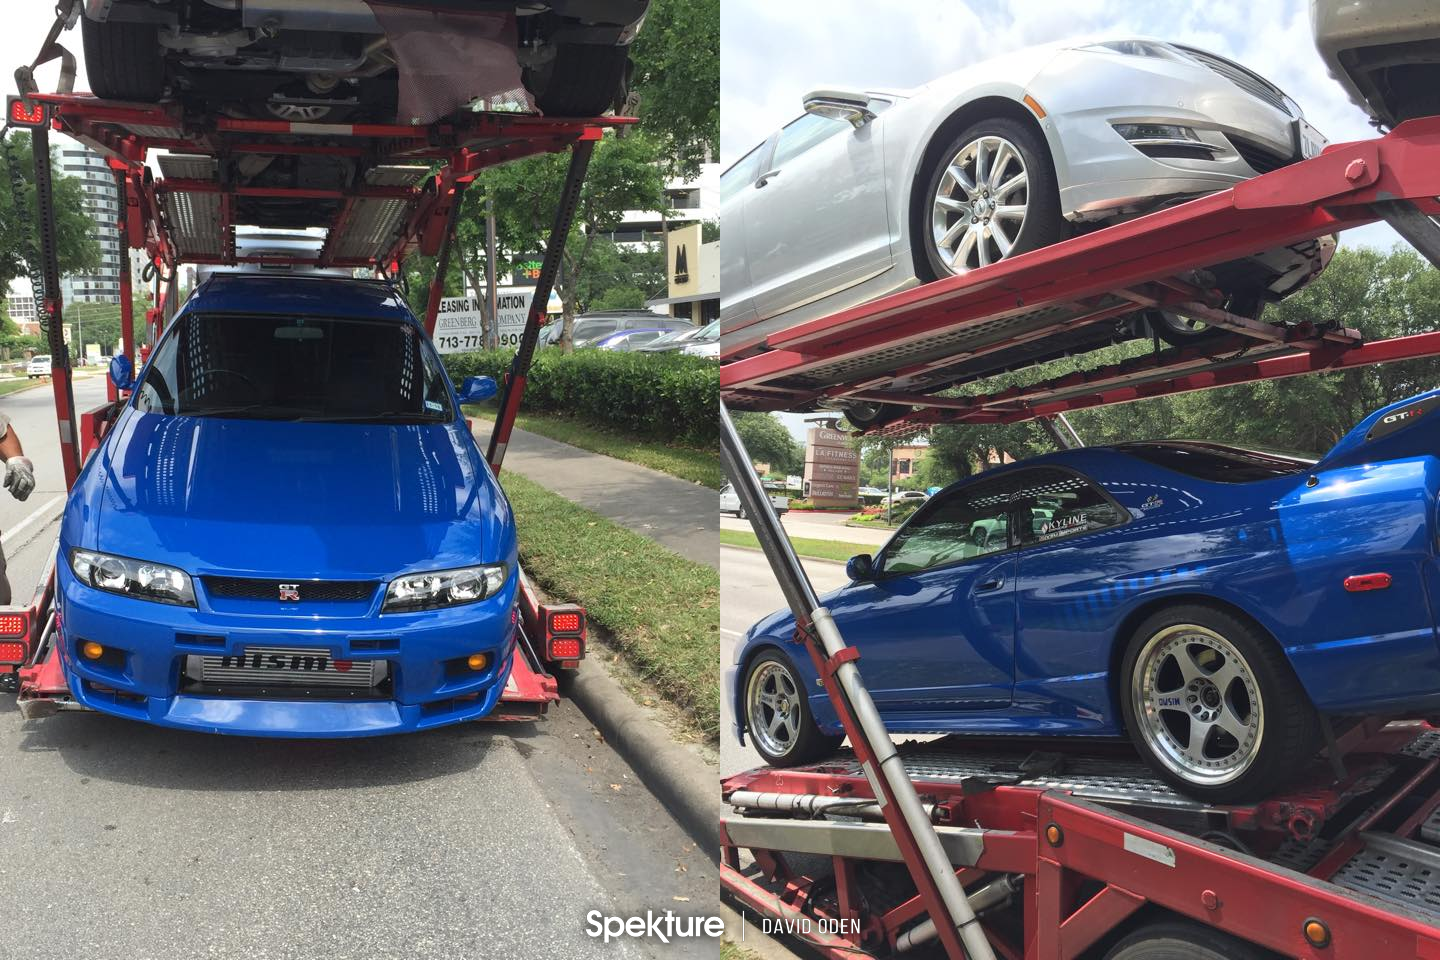 All The Way From Japan The Journey Of A Rare Nissan Skyline Gtr R33 Lm Spekture